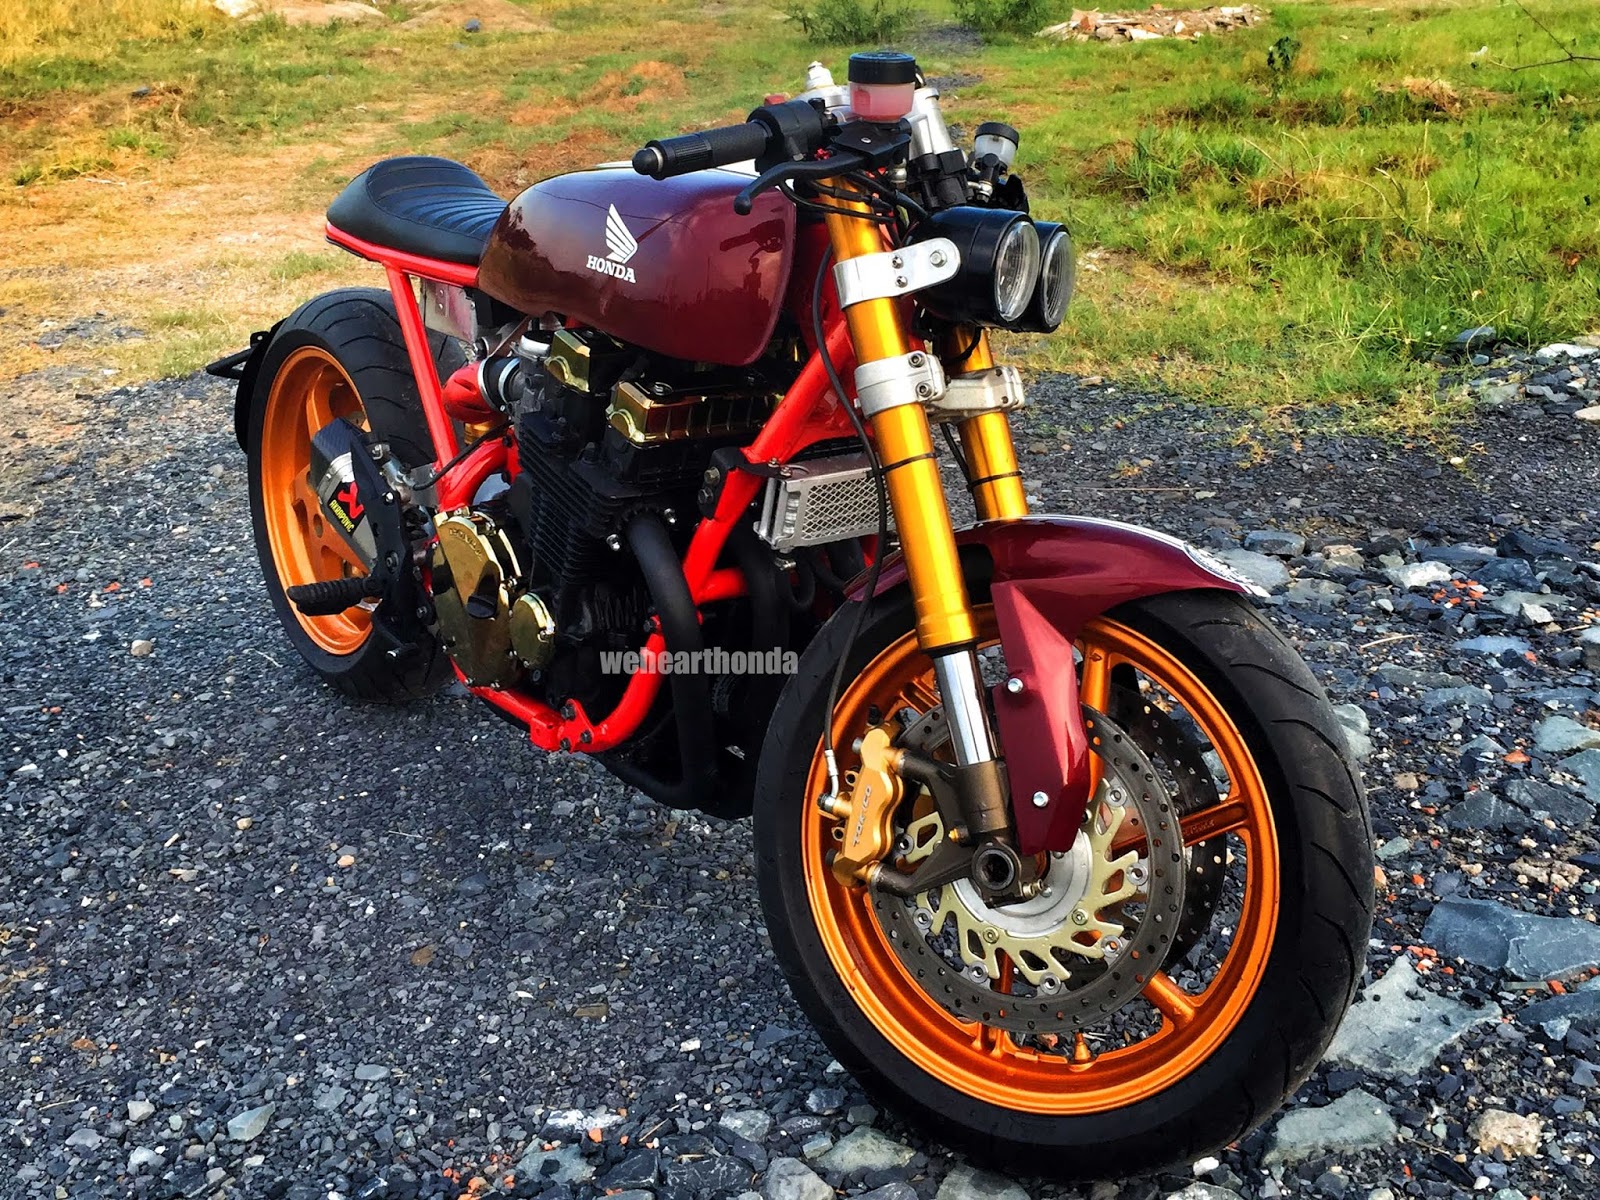 Honda CB750 Cafe Racer with beautiful colors